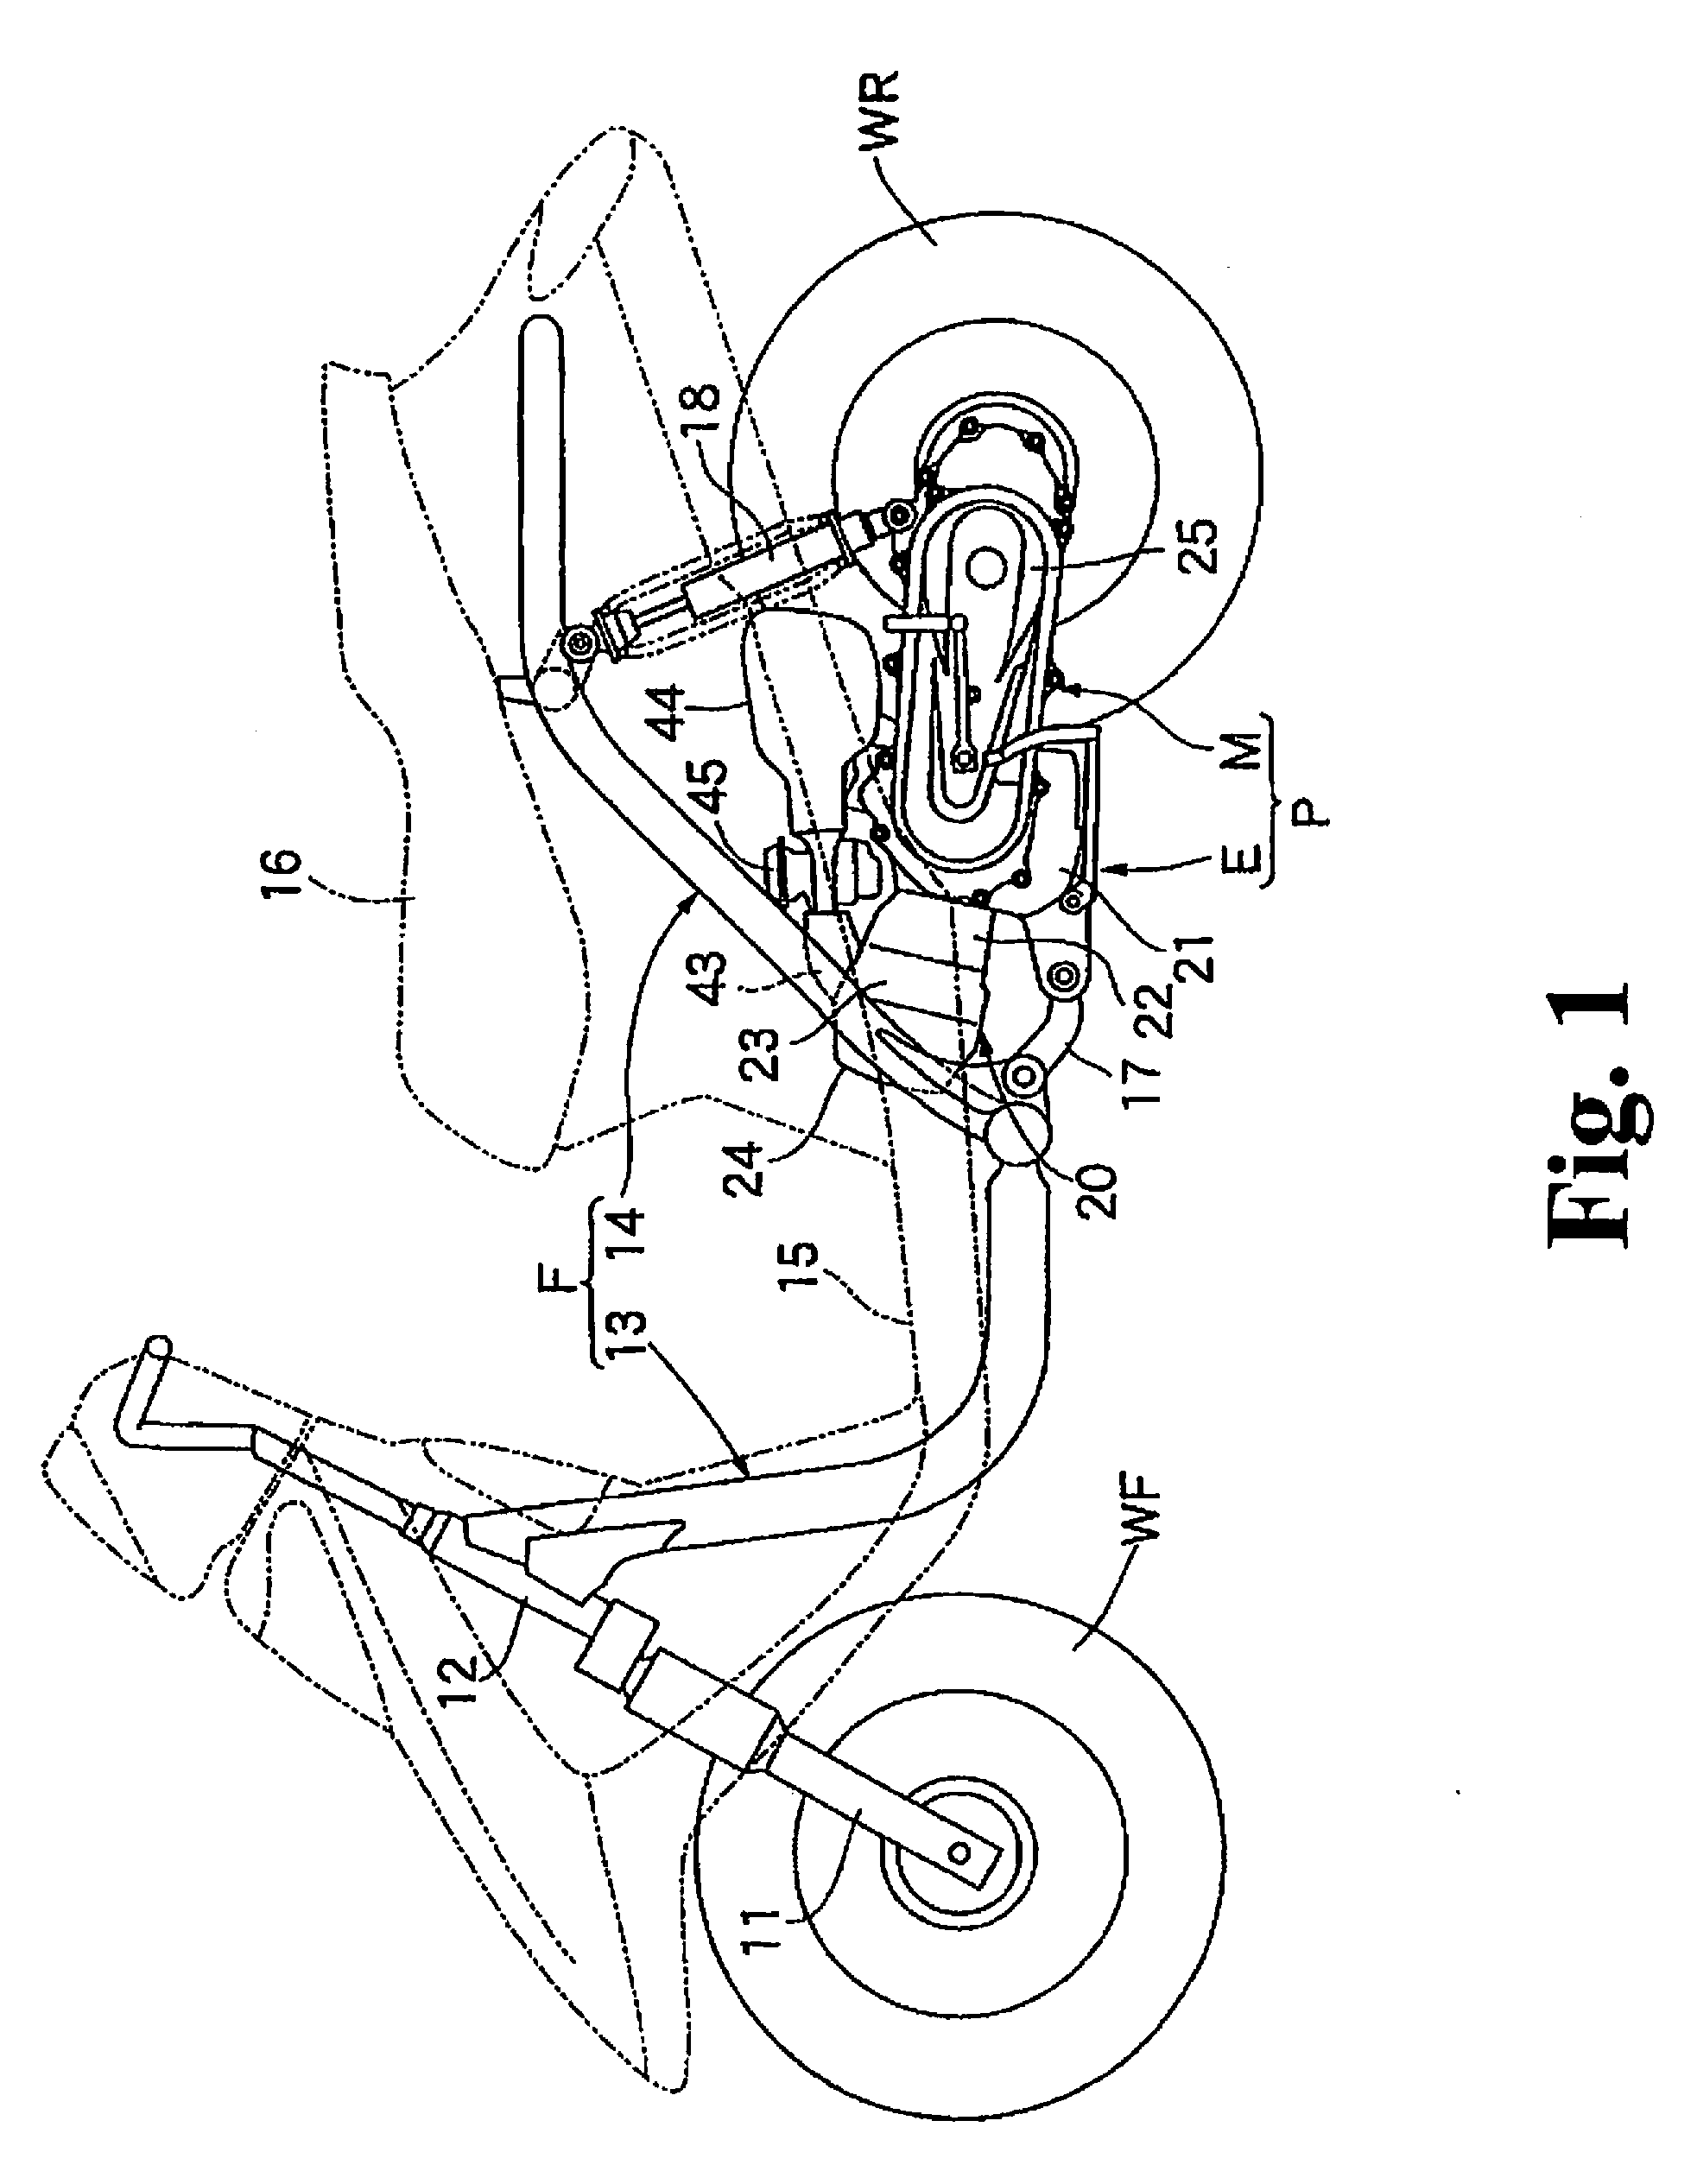 Lubricating device for engine